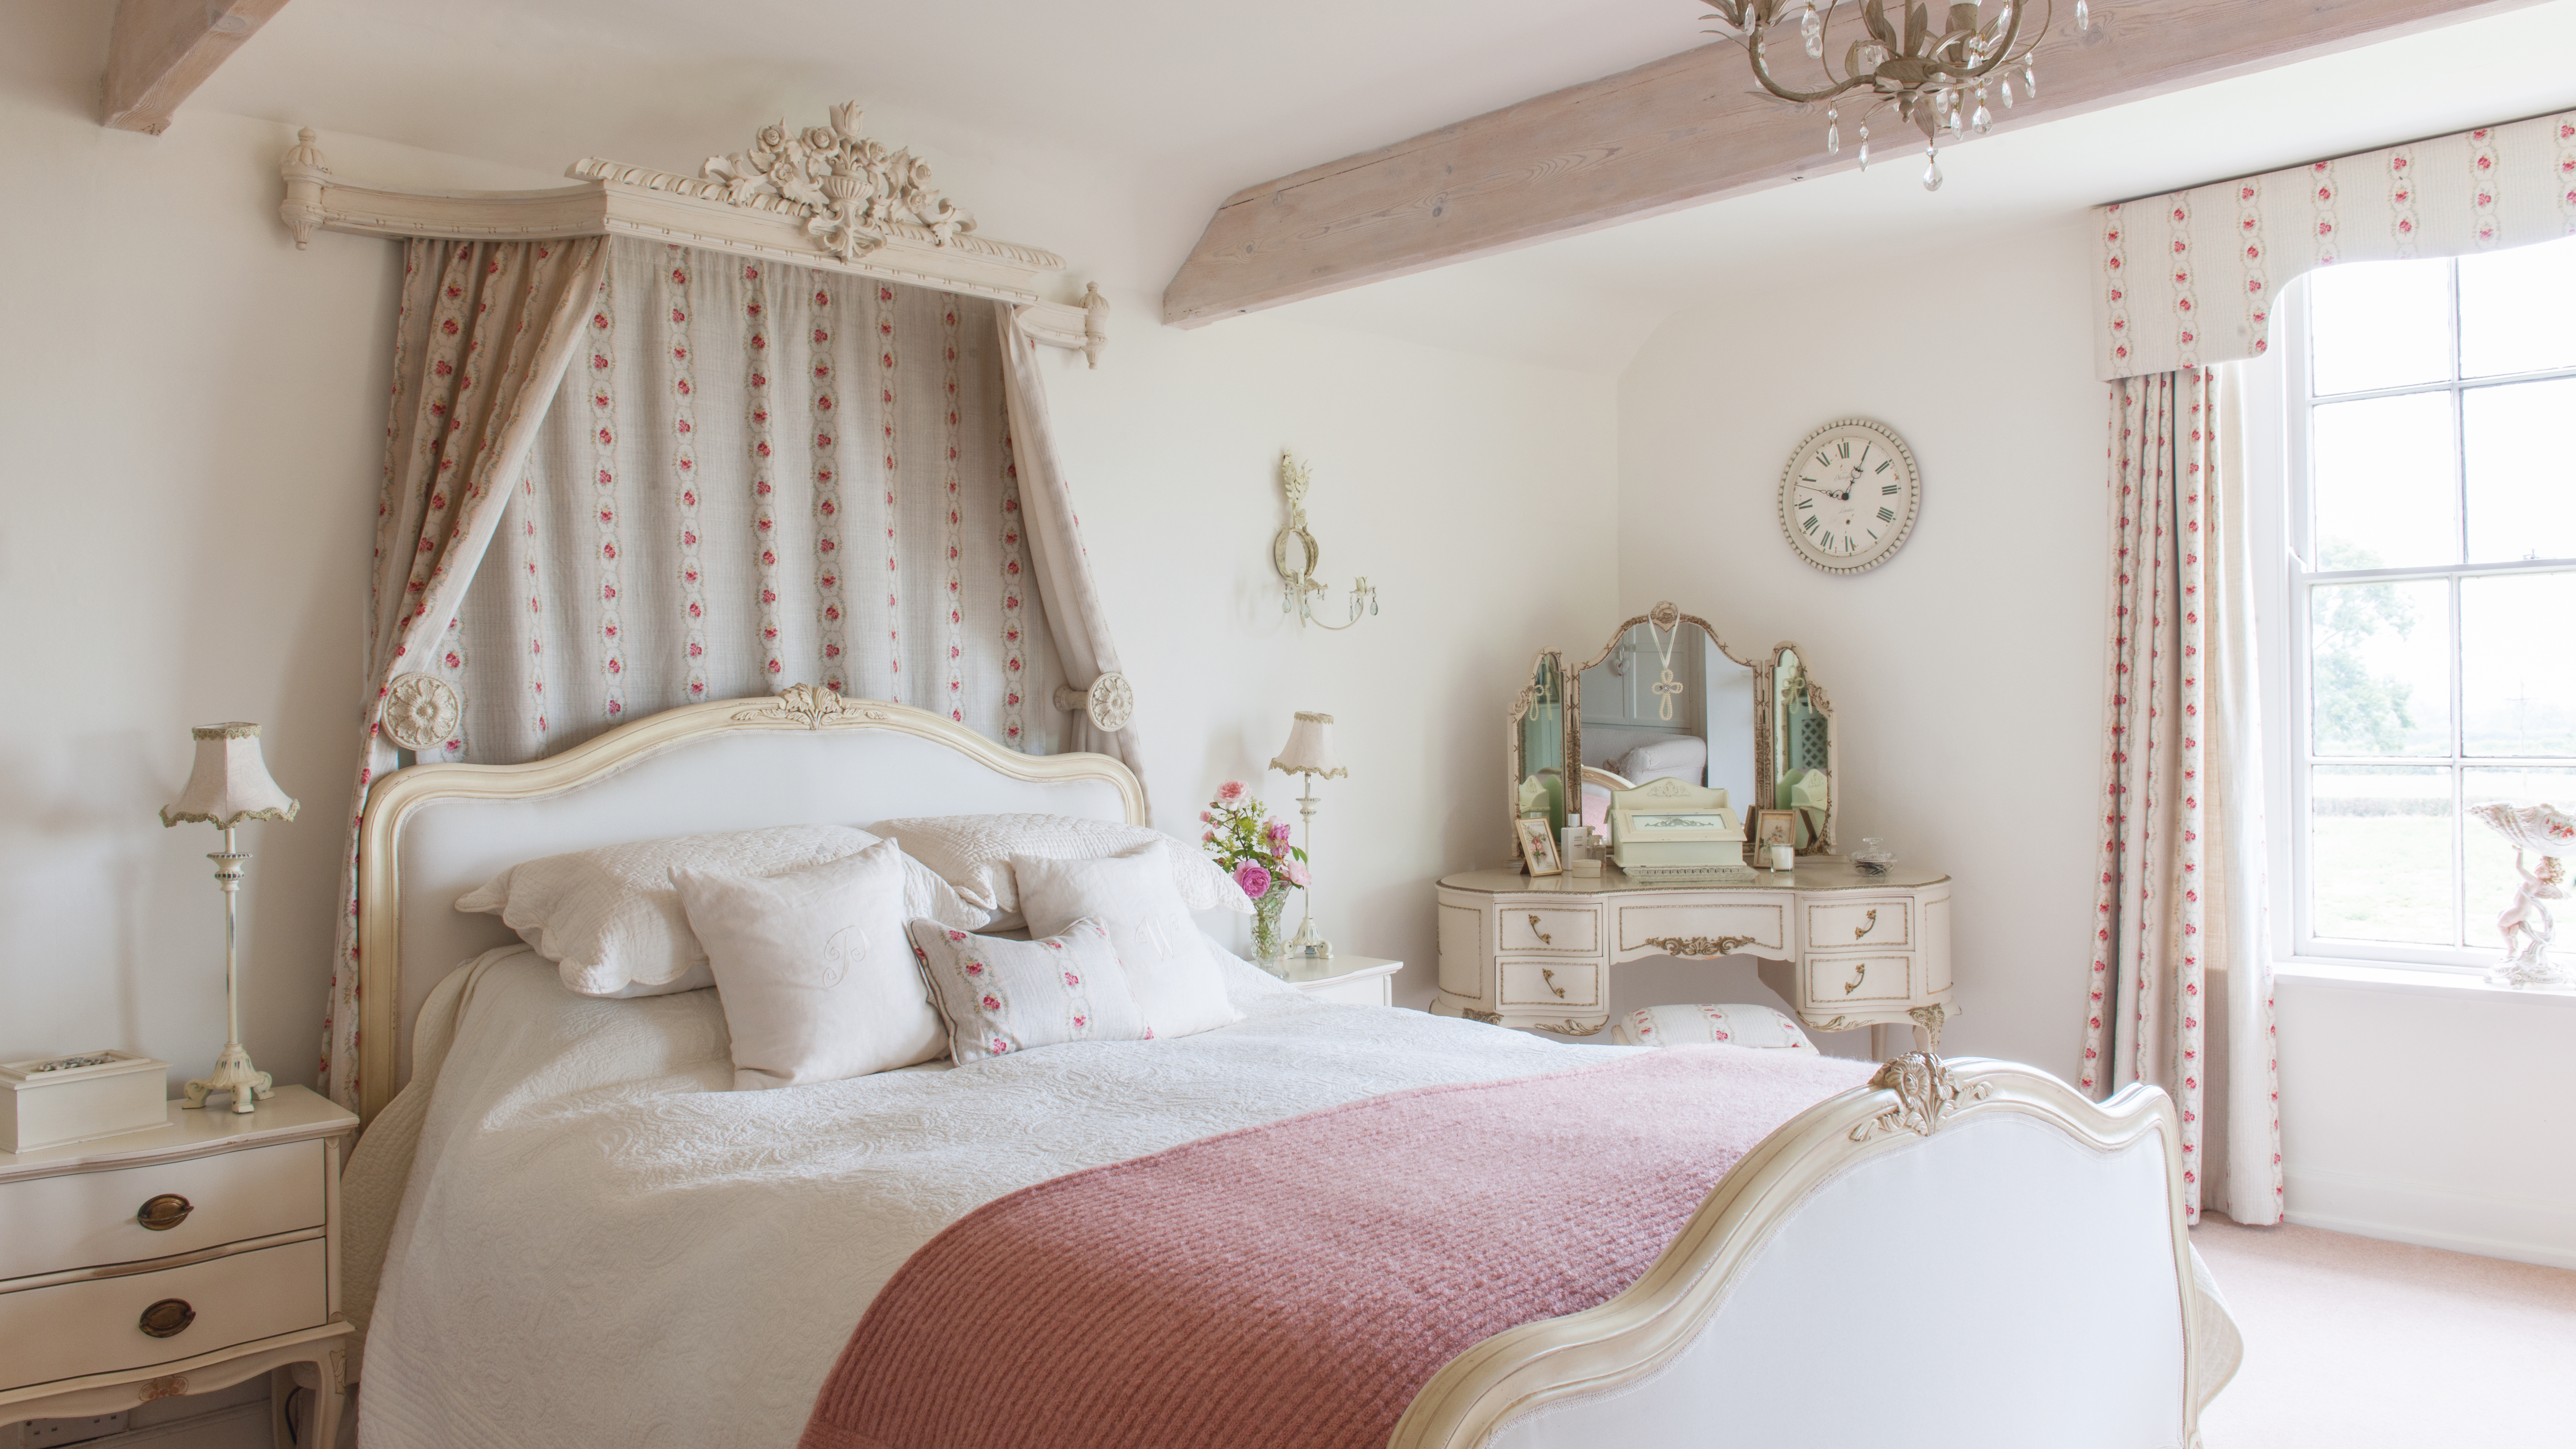 French-style bedroom with coronet and country feel